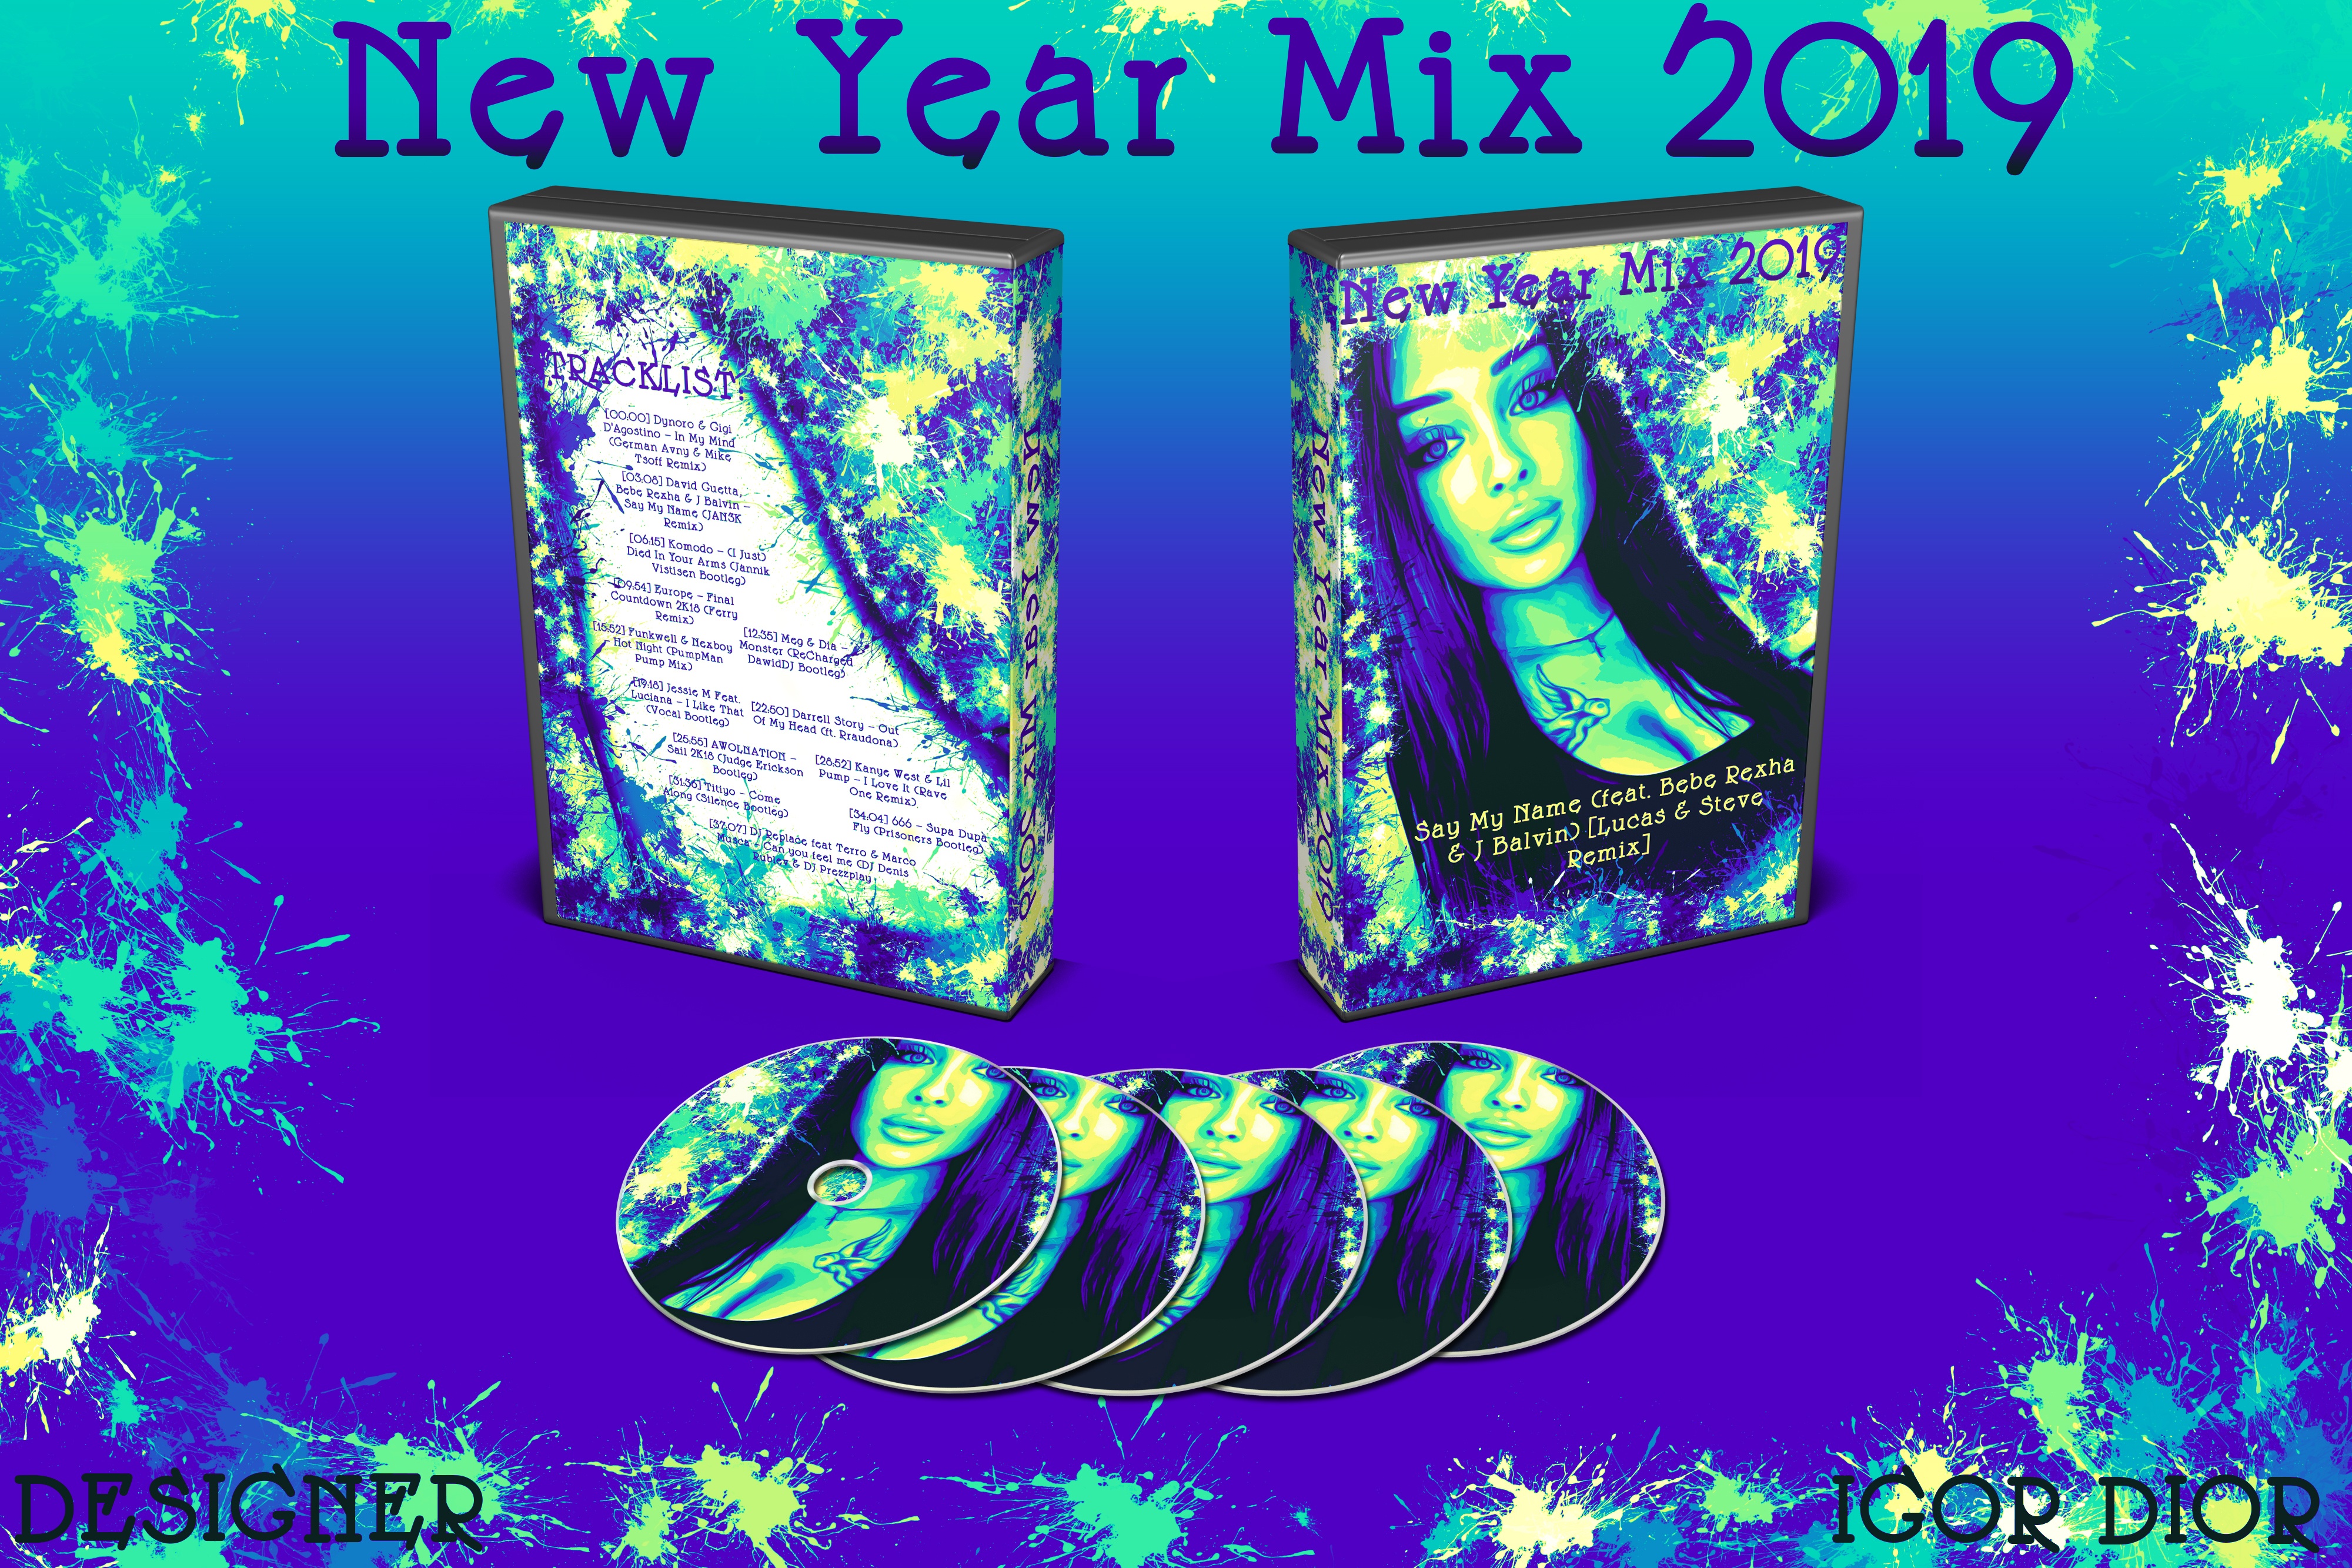 New Year Mix 2019 box cover